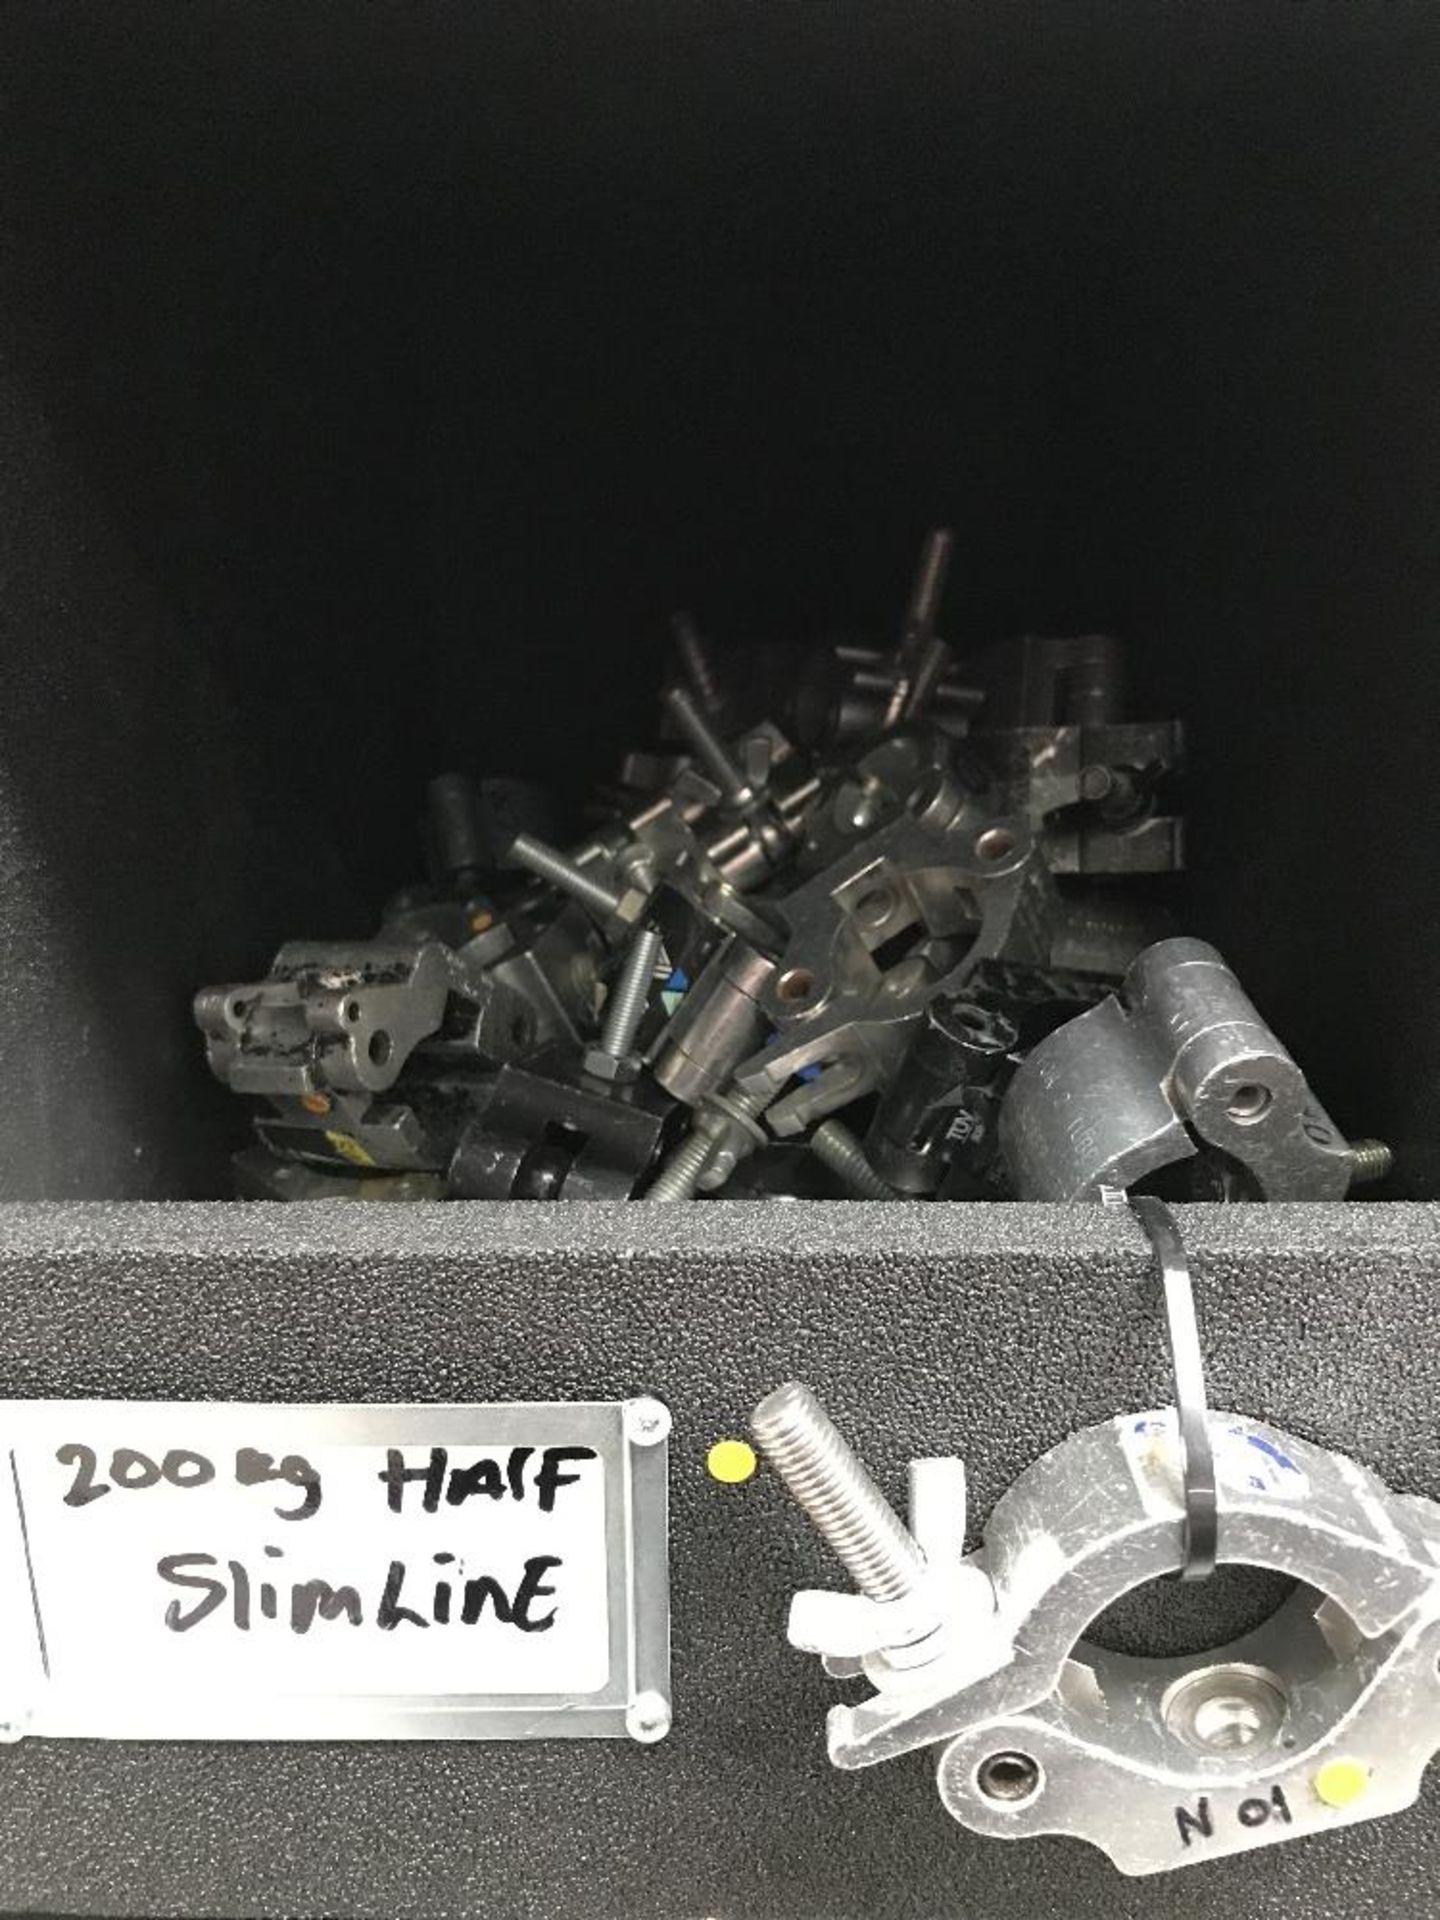 Contents Of Rigging Shelving - Image 22 of 26